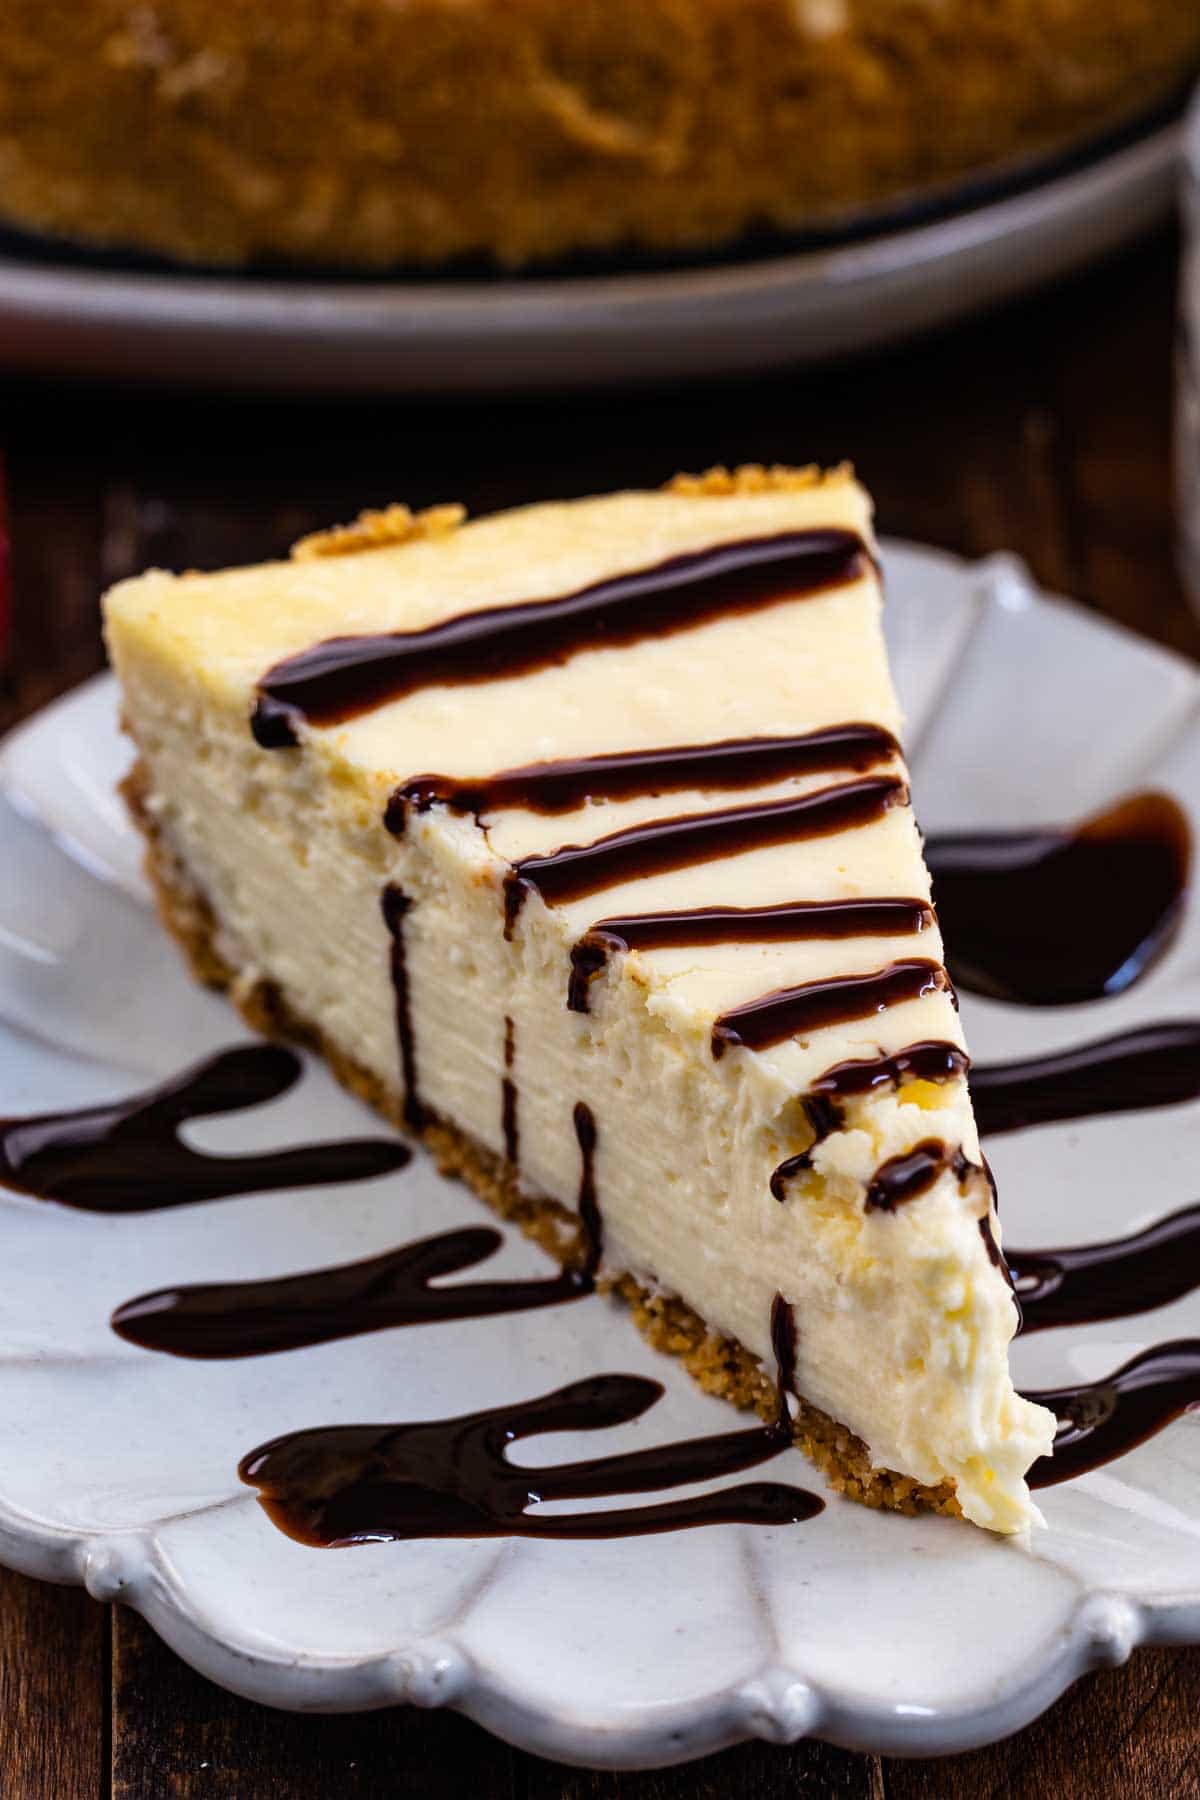 One slice of classic cheesecake on a scalloped plate with a chocolate sauce drizzle